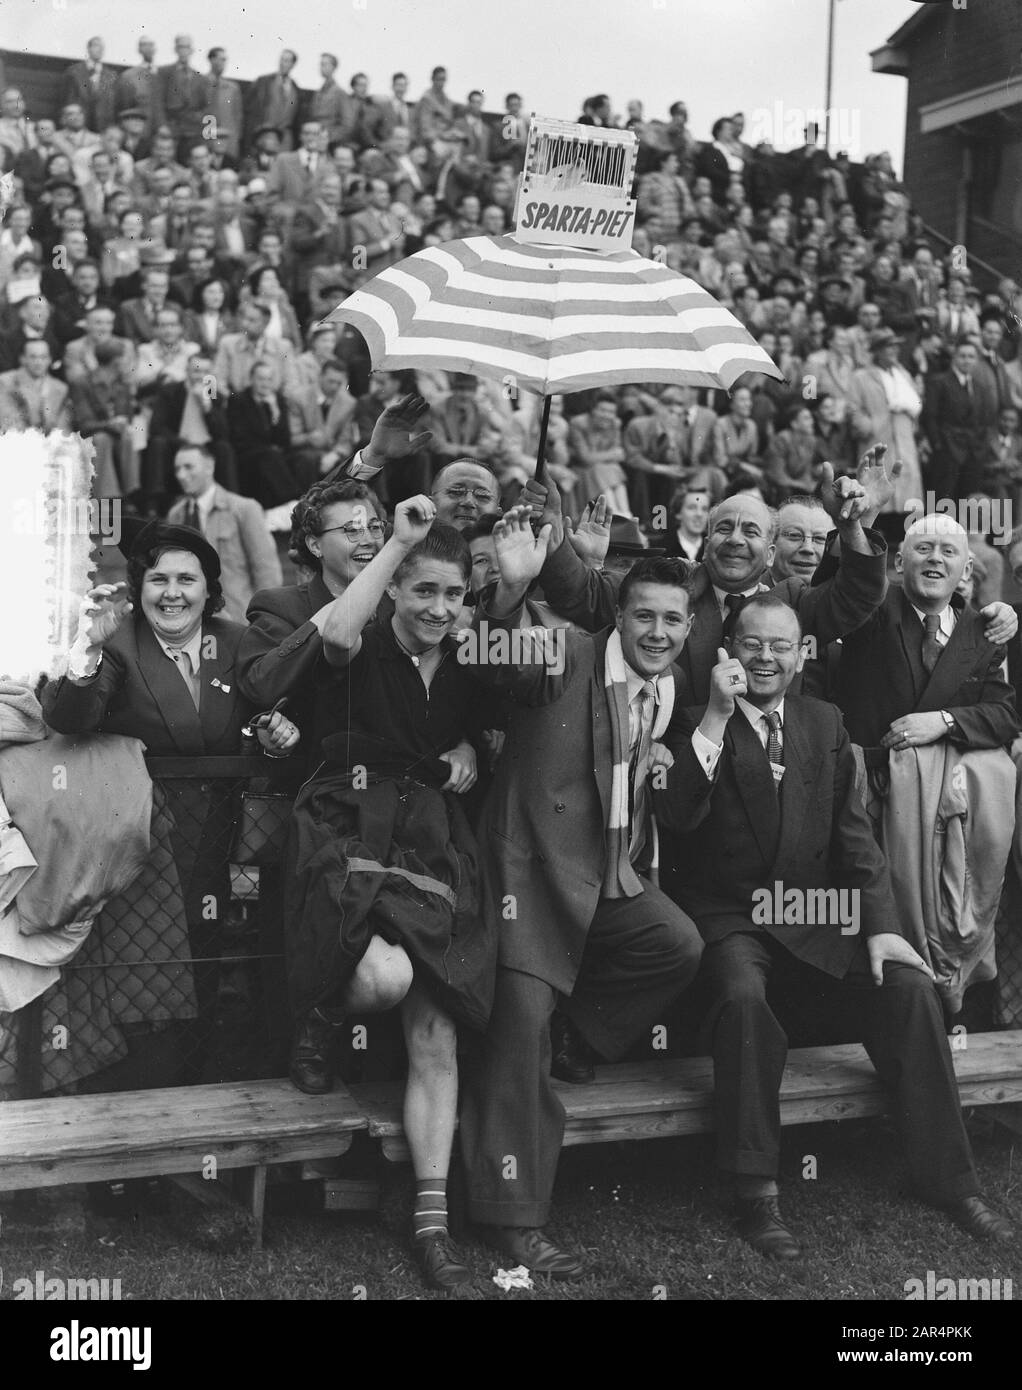 Champion Football. RCH v Sparta 2-2.Pl. public Date: 17 June 1953 Location: Heemstede Keywords: sport, supporters, football Institution name: Sparta Stock Photo